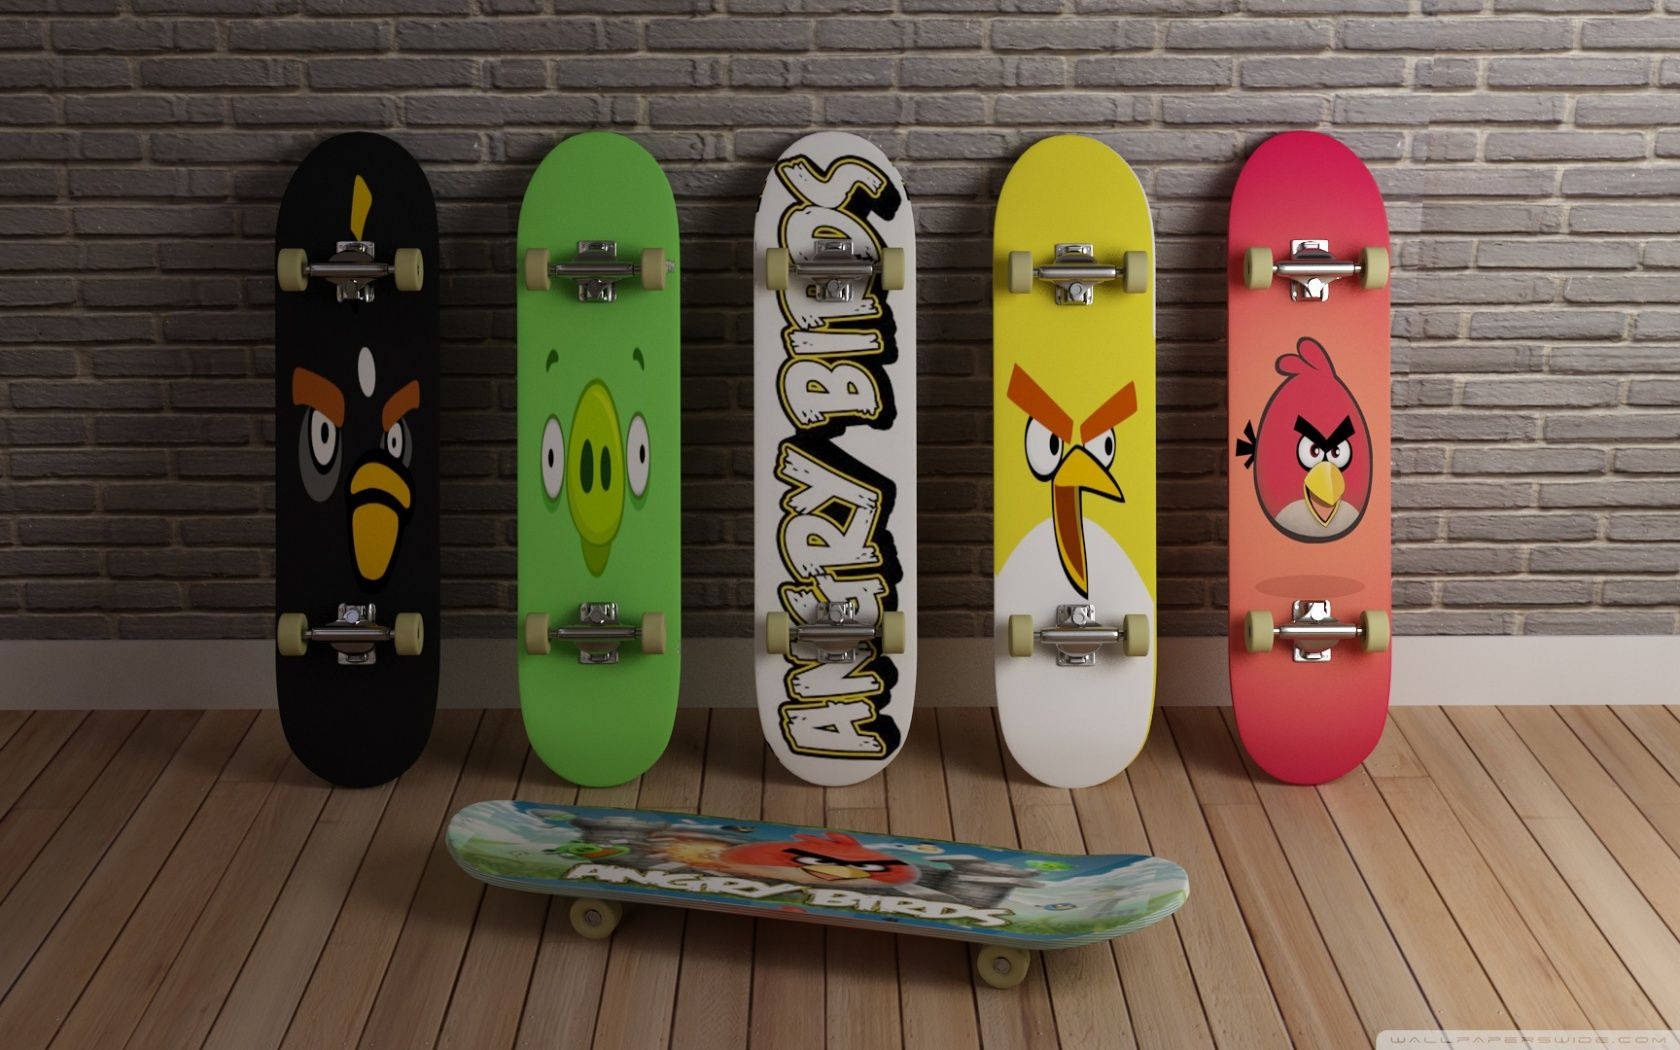 Get the Gang Together & Drift Away on Angry Birds Skateboards Wallpaper